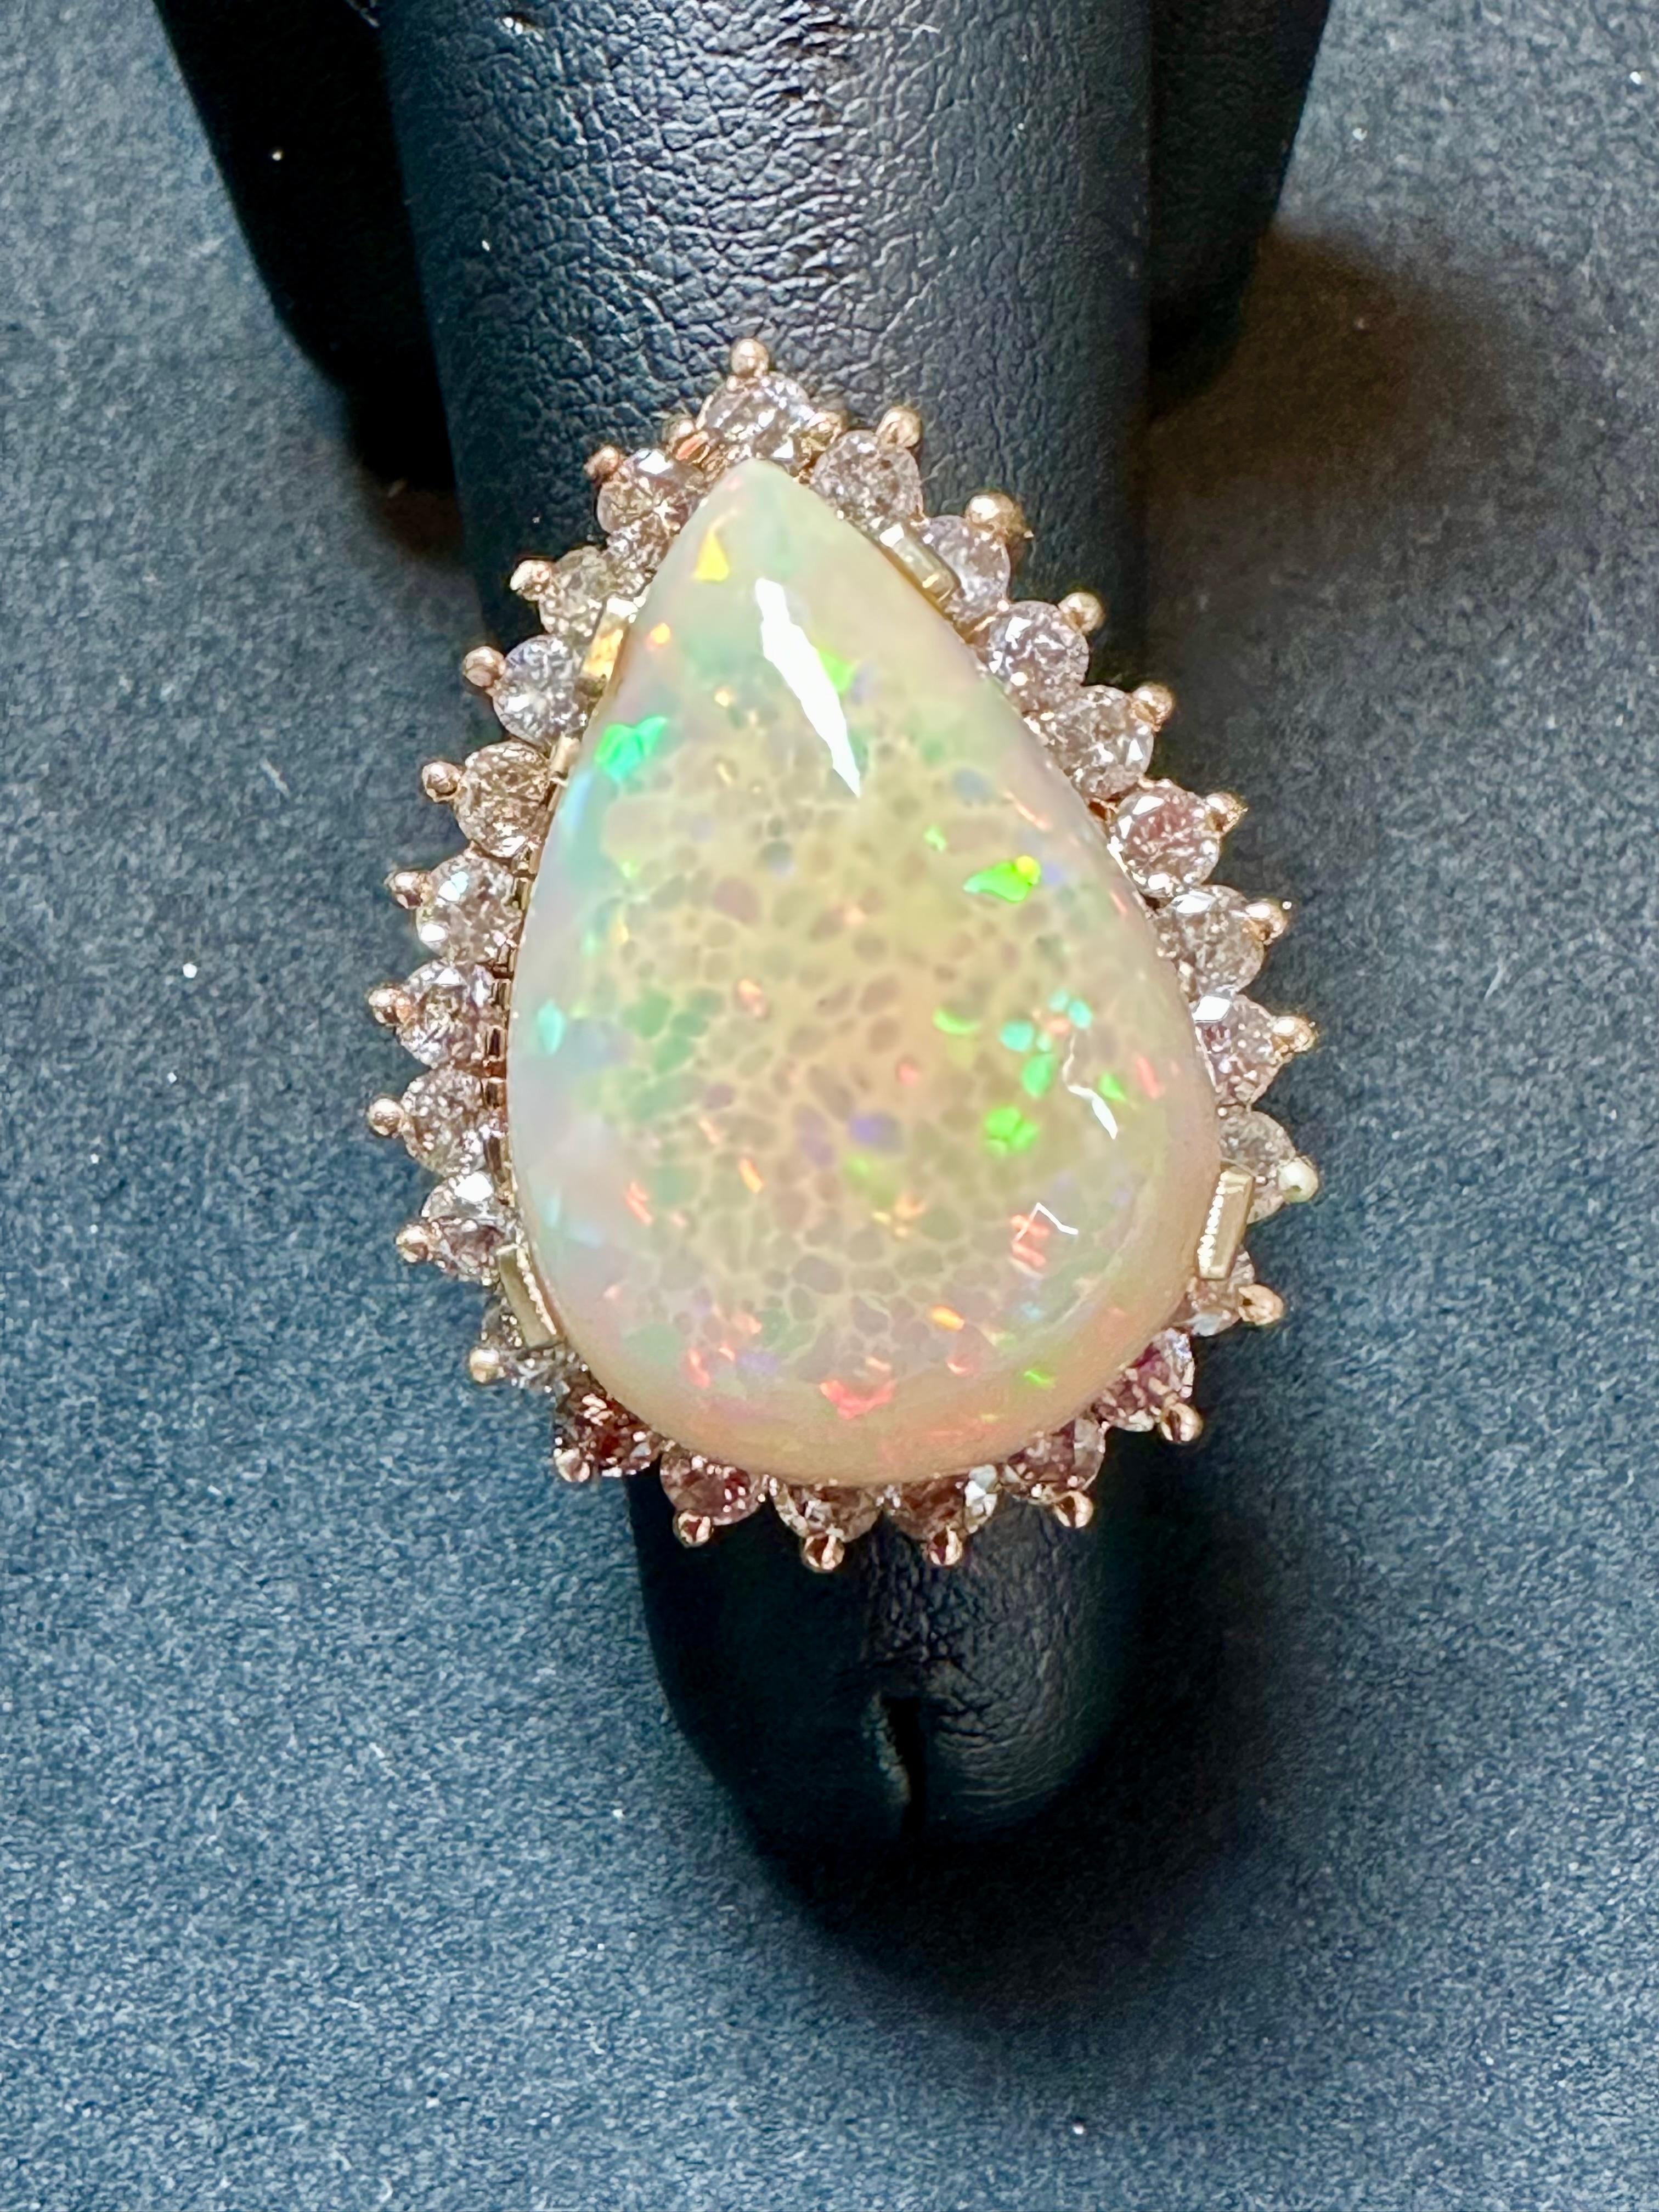 30 Carat Pear Cut Opal and Diamond 14 Karat Gold Cocktail Ring, Estate In Excellent Condition For Sale In New York, NY